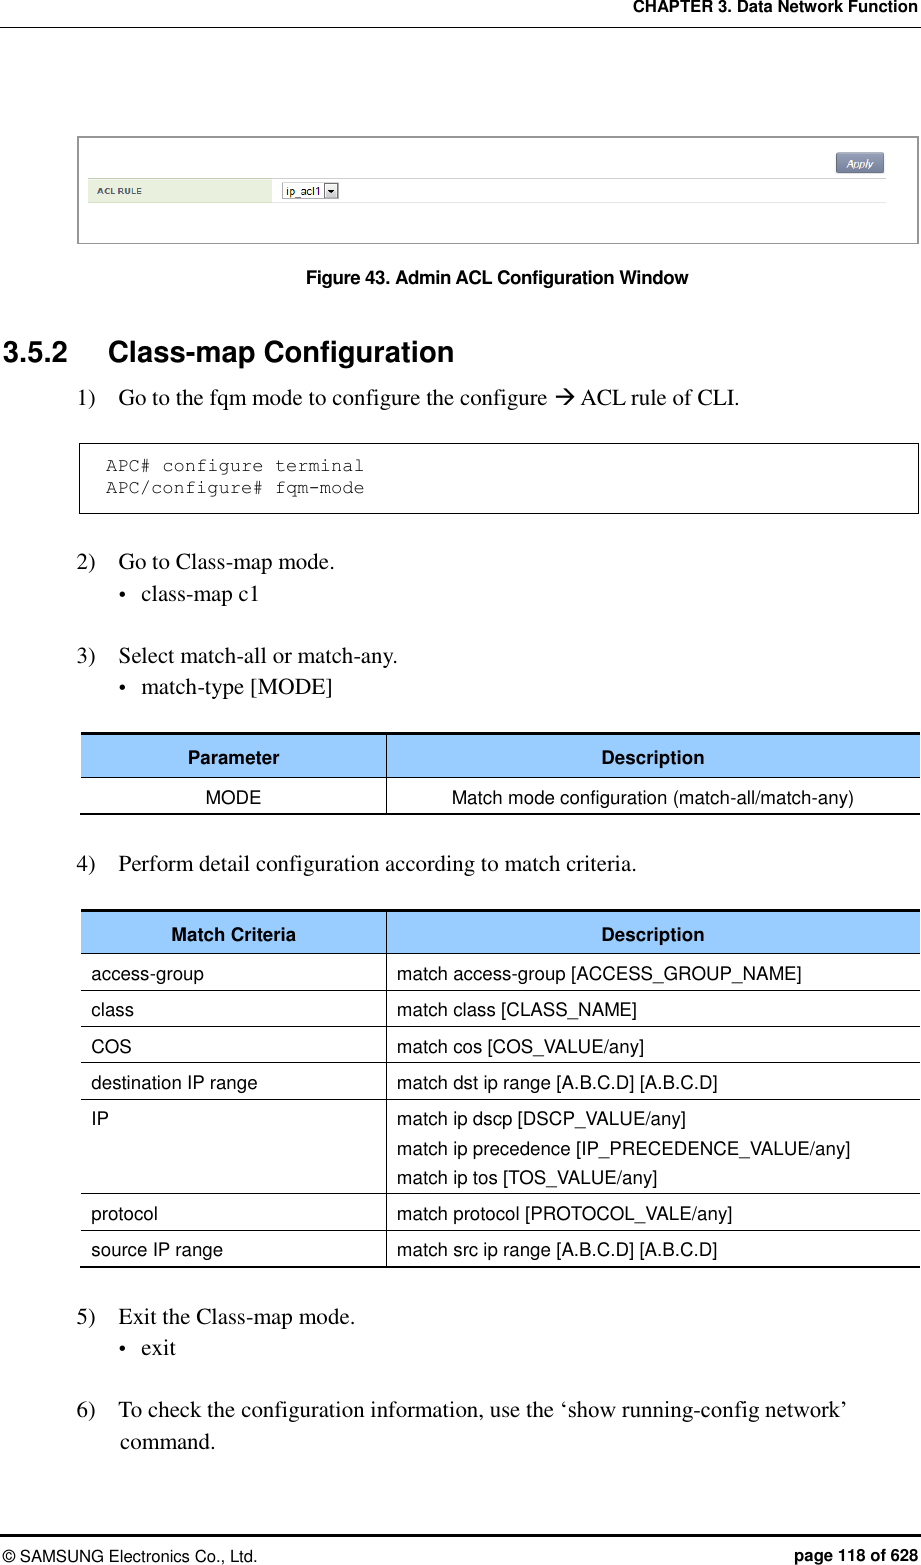 CHAPTER 3. Data Network Function ©  SAMSUNG Electronics Co., Ltd.  page 118 of 628  Figure 43. Admin ACL Configuration Window  3.5.2  Class-map Configuration 1)    Go to the fqm mode to configure the configure  ACL rule of CLI.  APC# configure terminal APC/configure# fqm-mode  2)    Go to Class-map mode.  class-map c1  3)    Select match-all or match-any.  match-type [MODE]  Parameter Description MODE Match mode configuration (match-all/match-any)  4)    Perform detail configuration according to match criteria.  Match Criteria Description access-group match access-group [ACCESS_GROUP_NAME] class match class [CLASS_NAME] COS   match cos [COS_VALUE/any] destination IP range match dst ip range [A.B.C.D] [A.B.C.D] IP match ip dscp [DSCP_VALUE/any] match ip precedence [IP_PRECEDENCE_VALUE/any] match ip tos [TOS_VALUE/any] protocol match protocol [PROTOCOL_VALE/any] source IP range match src ip range [A.B.C.D] [A.B.C.D]  5)    Exit the Class-map mode.  exit  6)    To check the configuration information, use the ‘show running-config network’ command.  